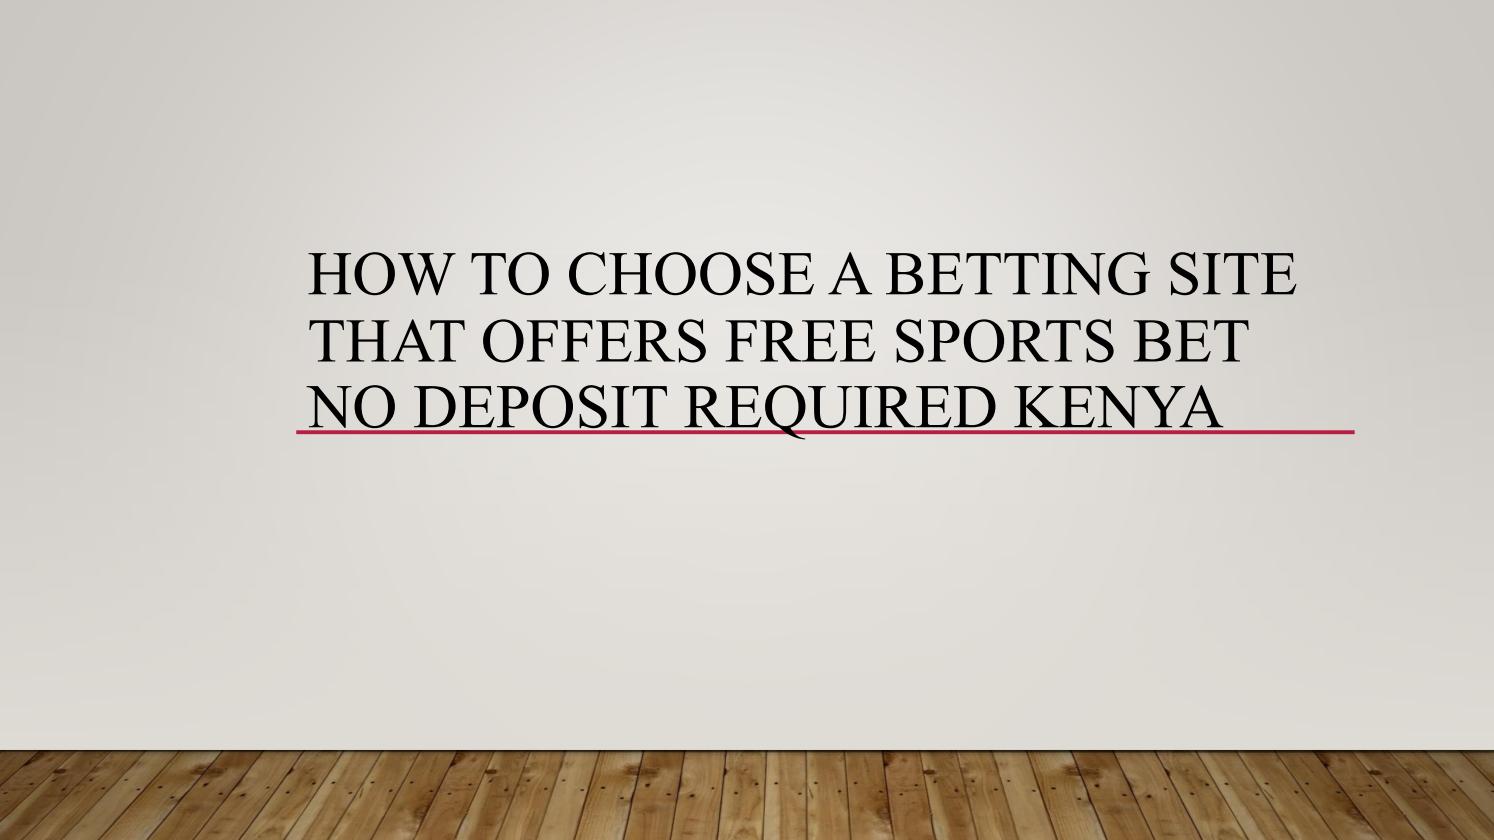 Betting site offers no deposit credit cards